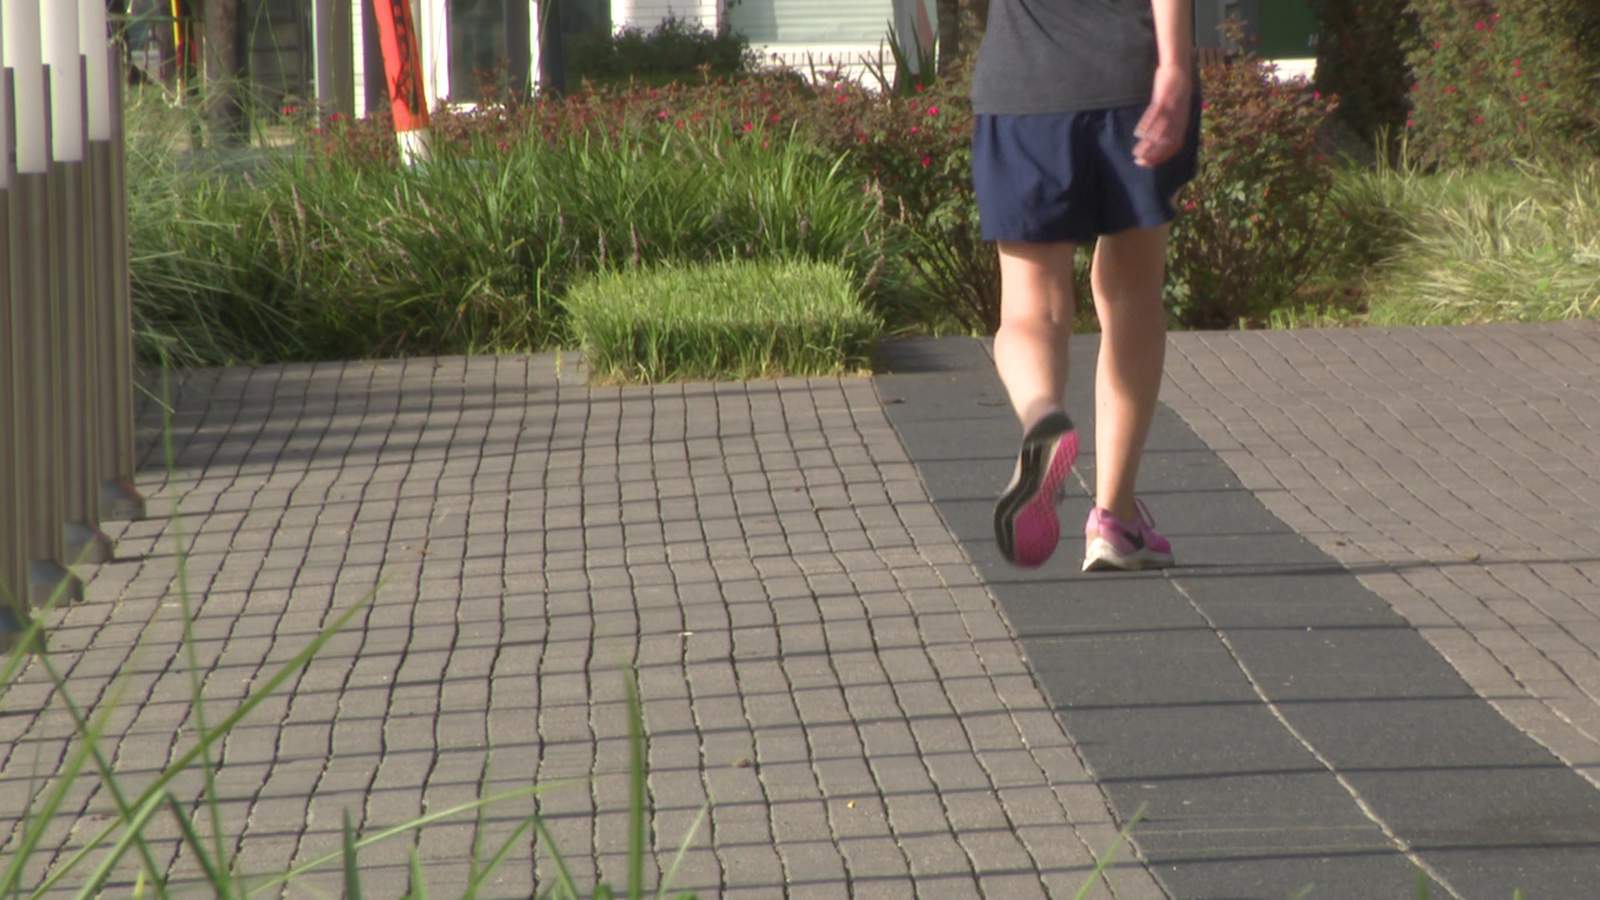 Ask 2: Does the Americans with Disabilities Act require the city of Houston to provide sidewalks?